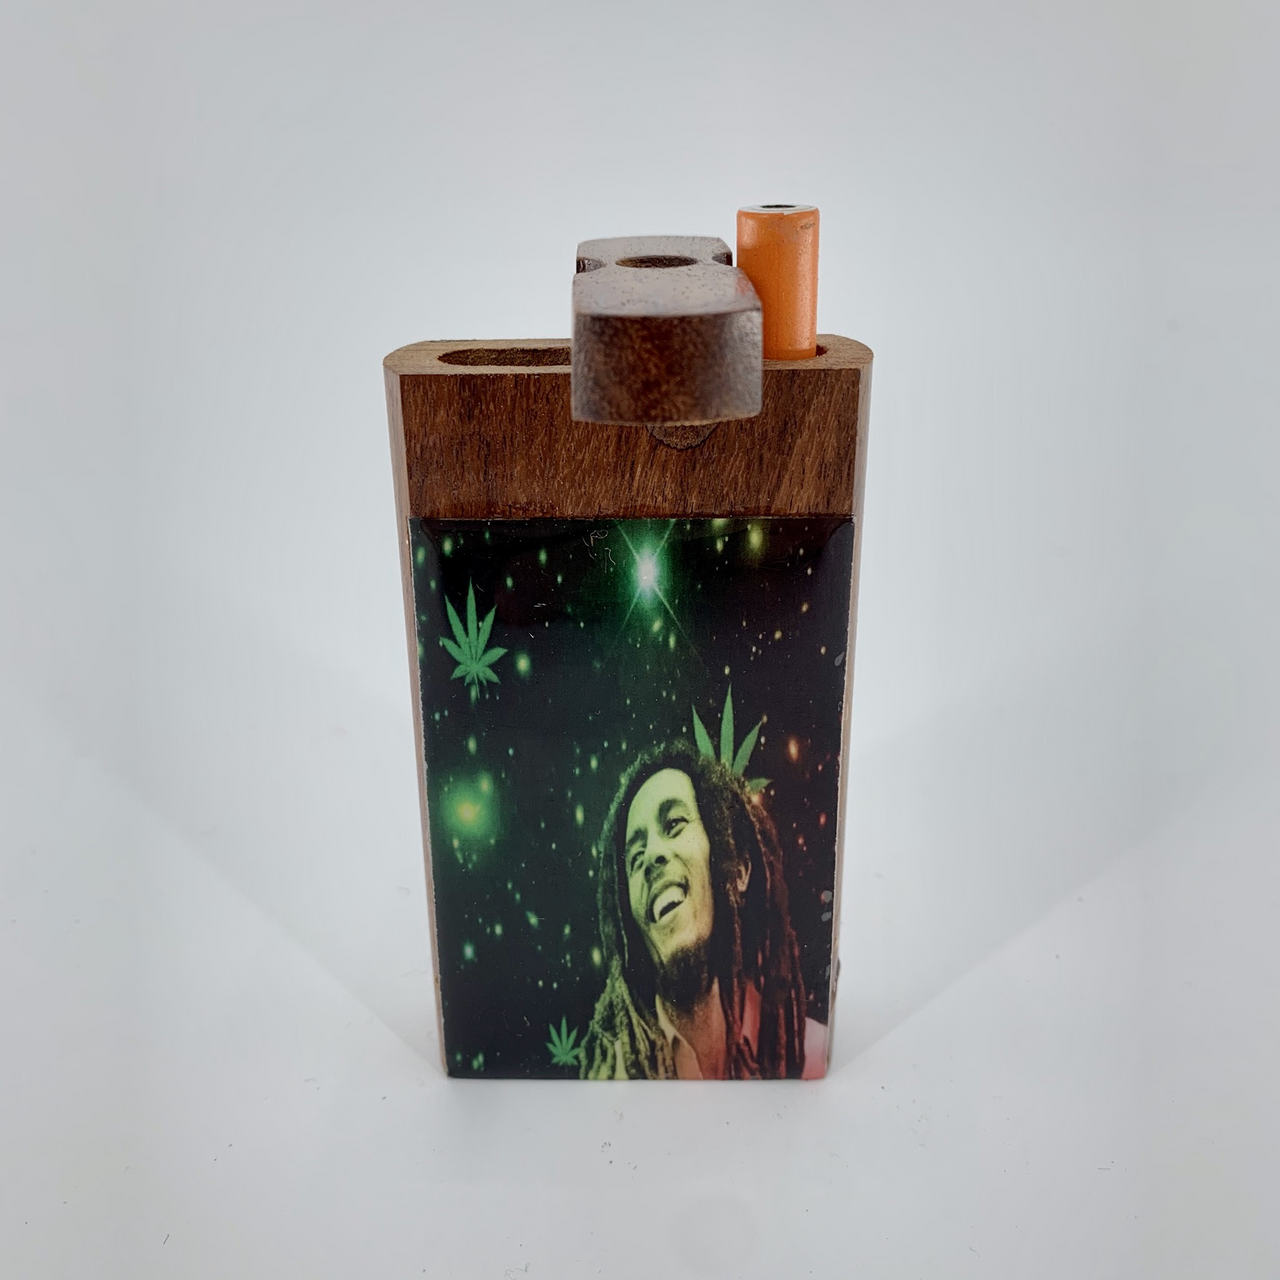 Rosewood Marley Stars Dugout (4")